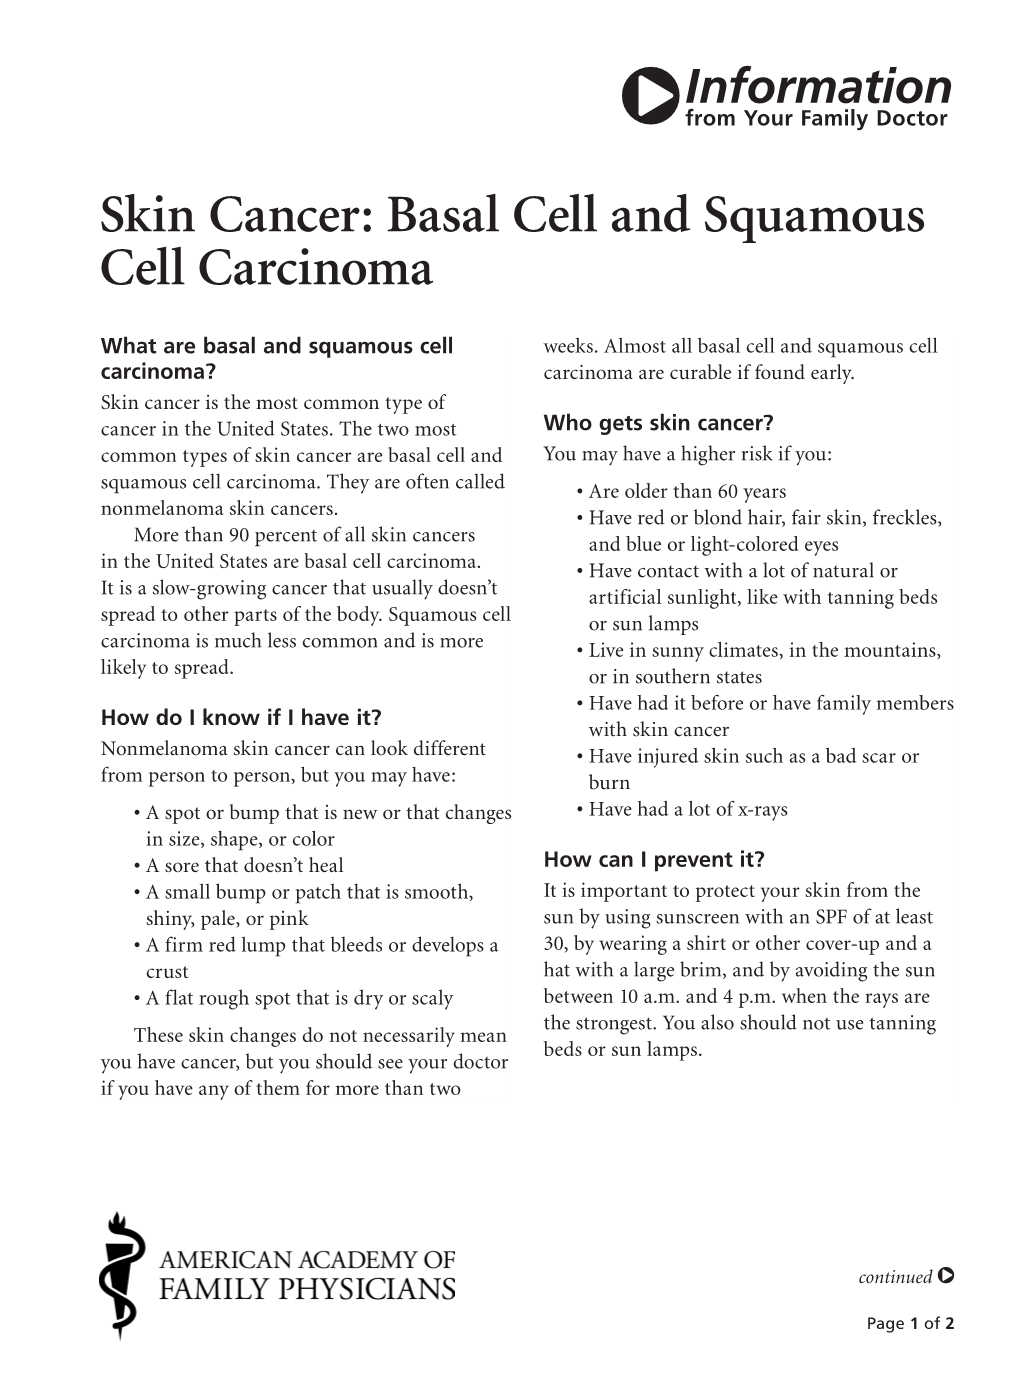 Basal Cell and Squamous Cell Carcinoma